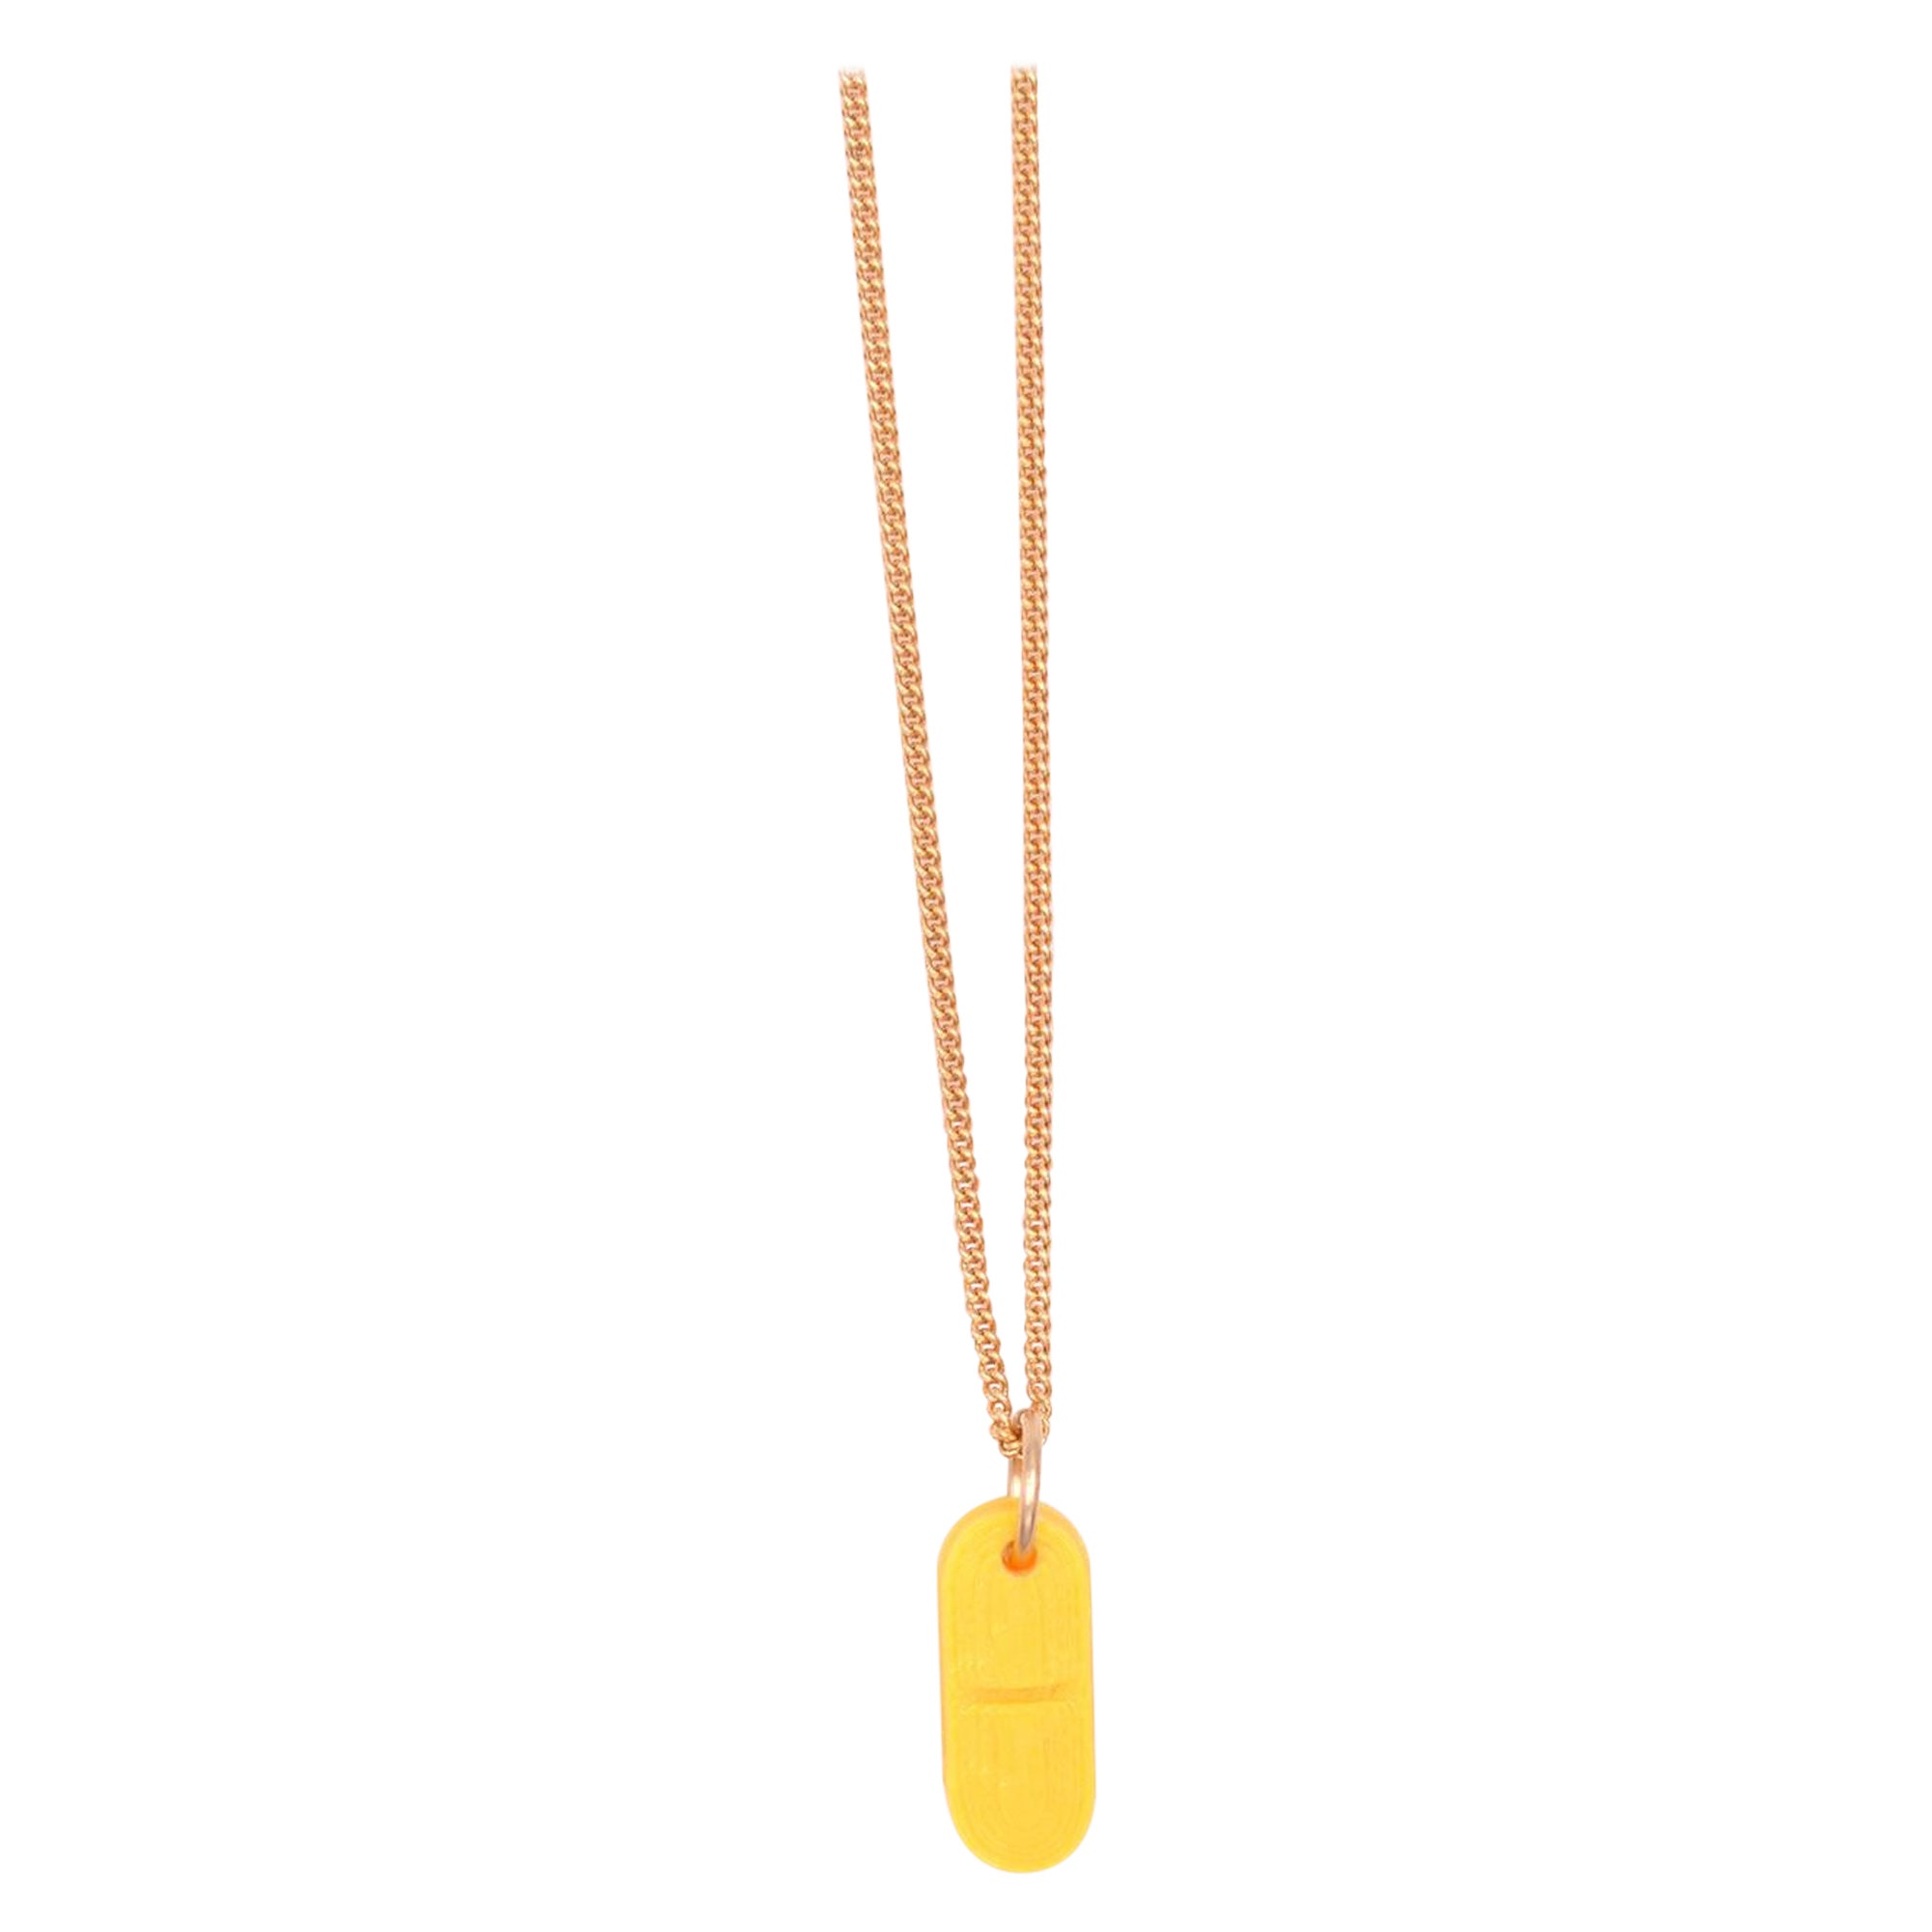 3d Printed Yellow Pill Necklace For Sale